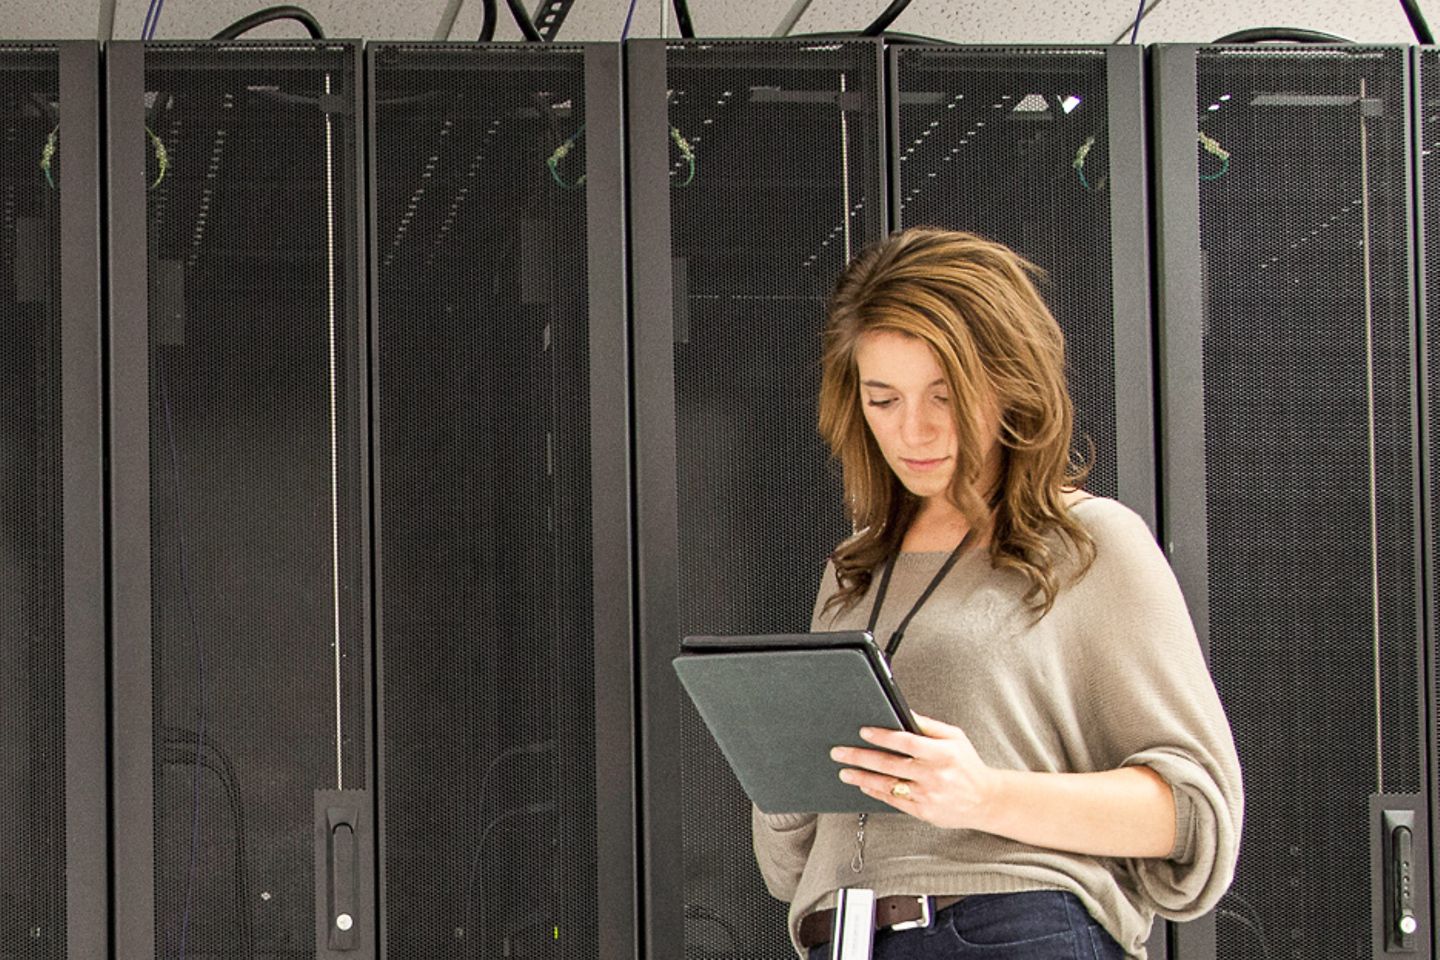 Businesswoman stands in front of servers racks and works on a tablet